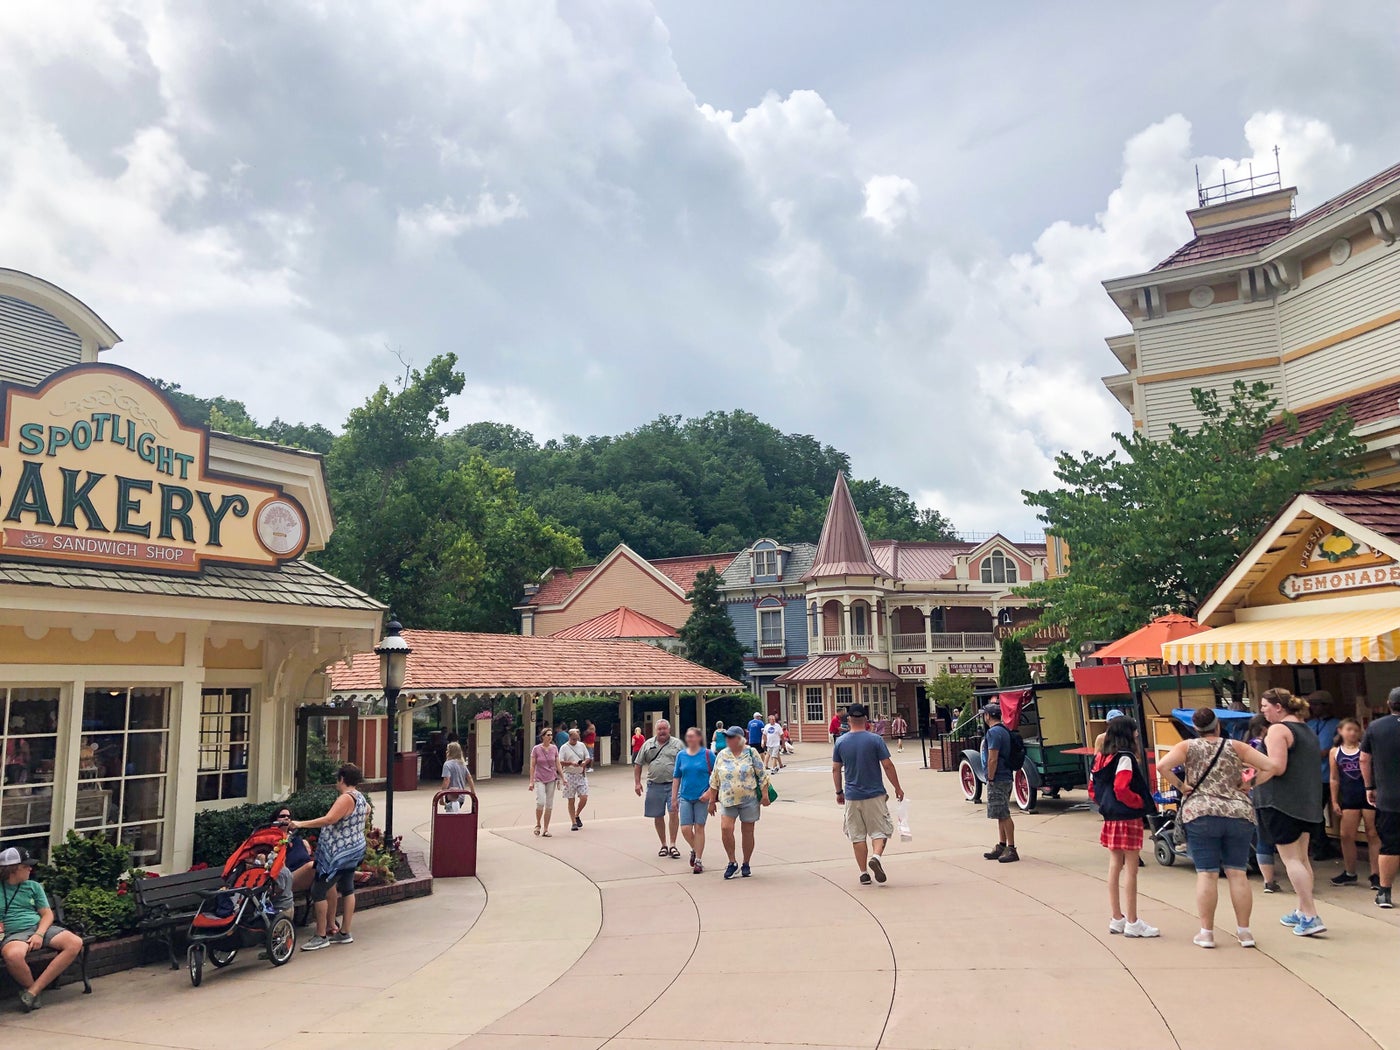 Everything you need to know about Dollywood